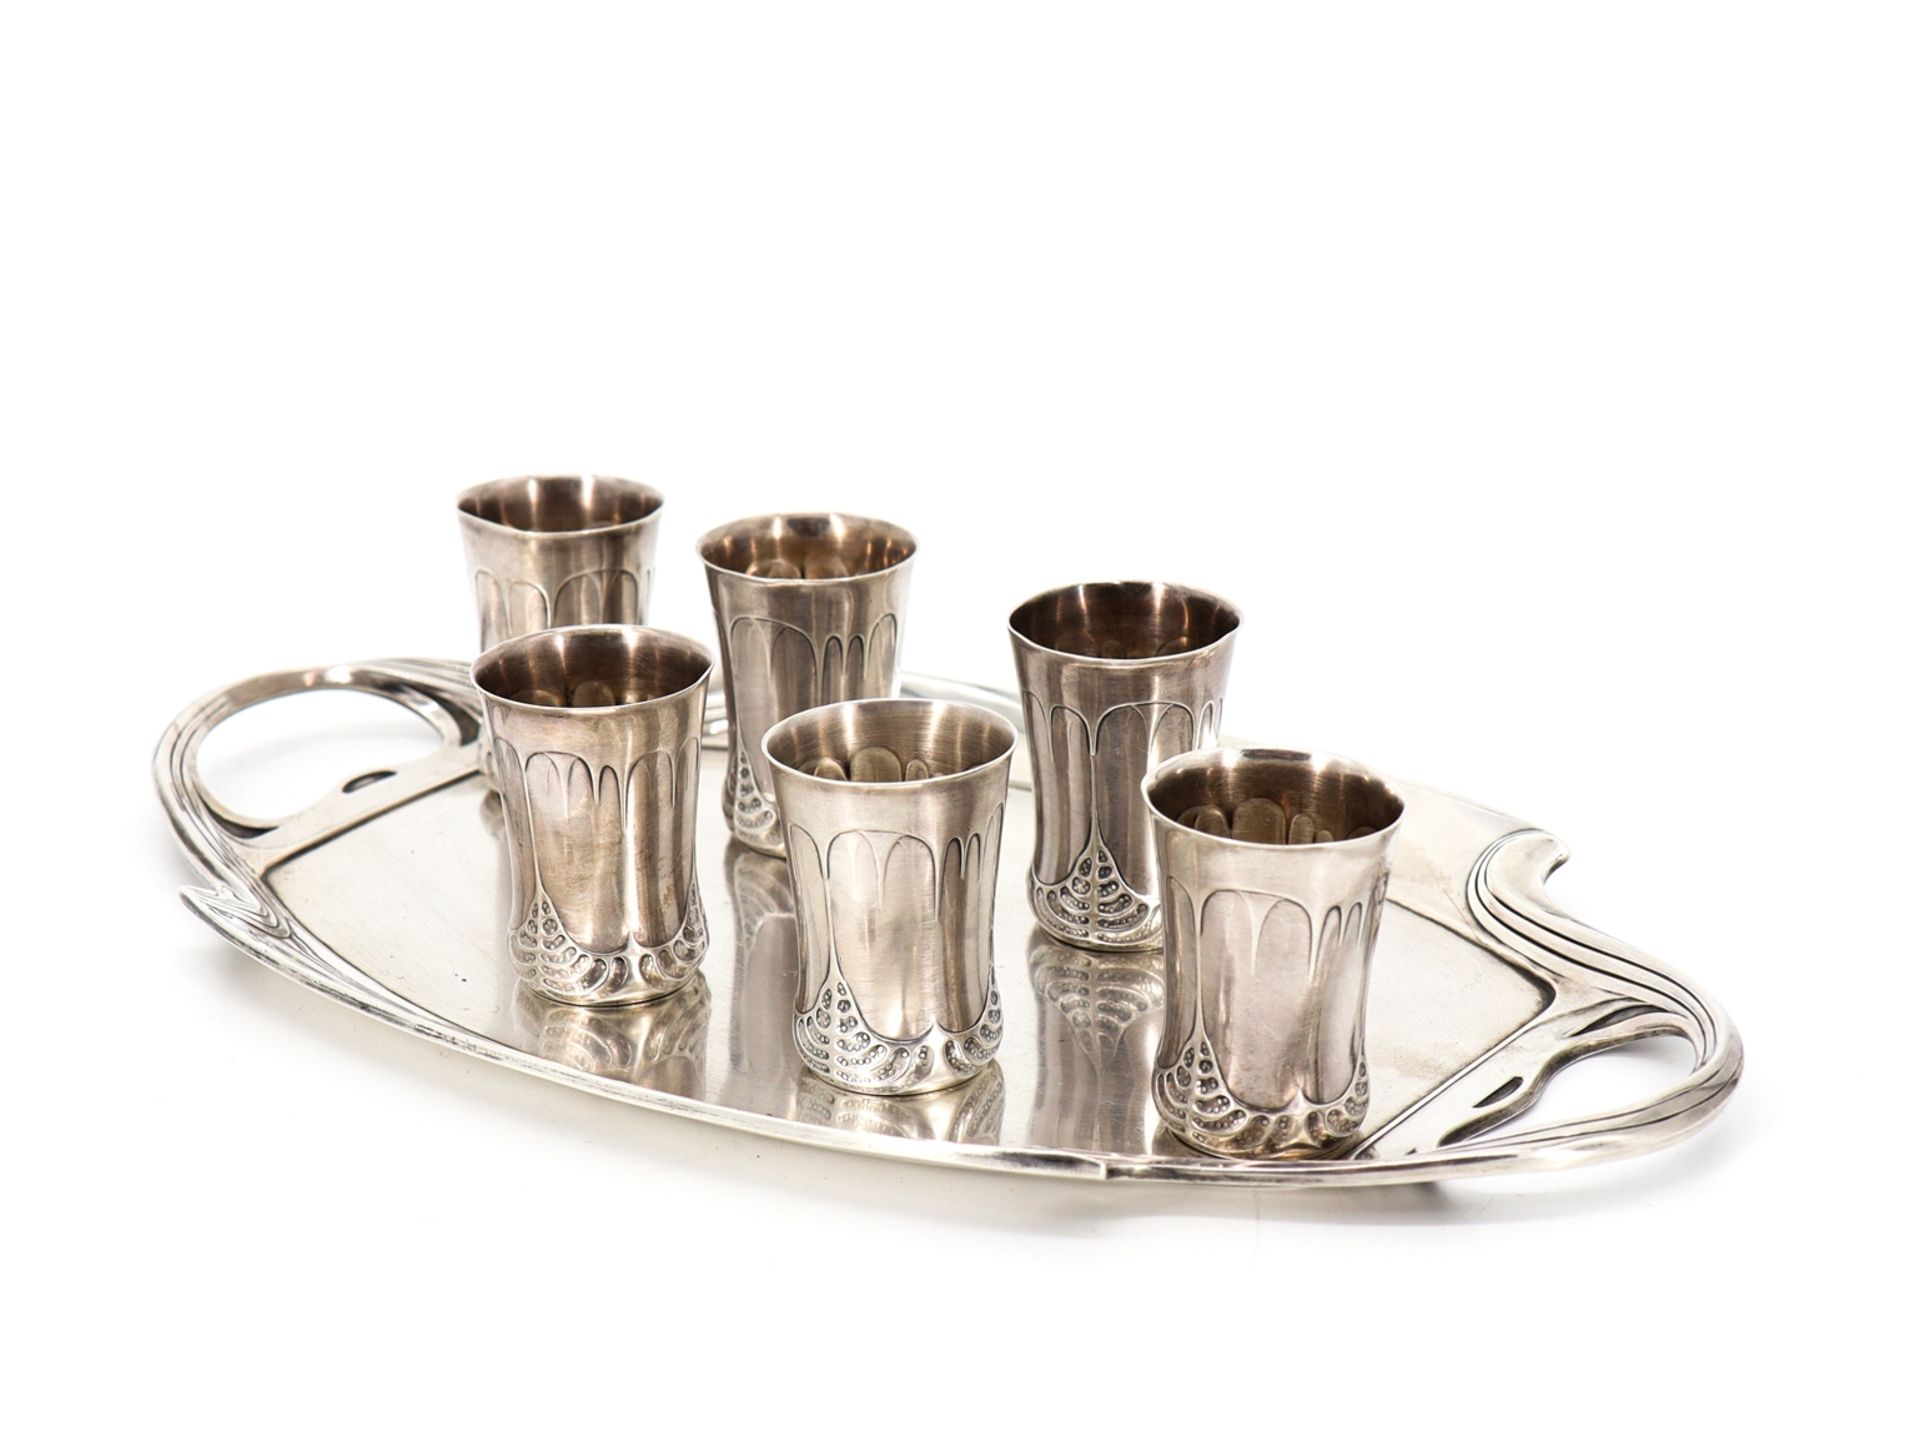 Art Nouveau tray in 925 sterling silver with 6 cups around 1900. - Image 7 of 7